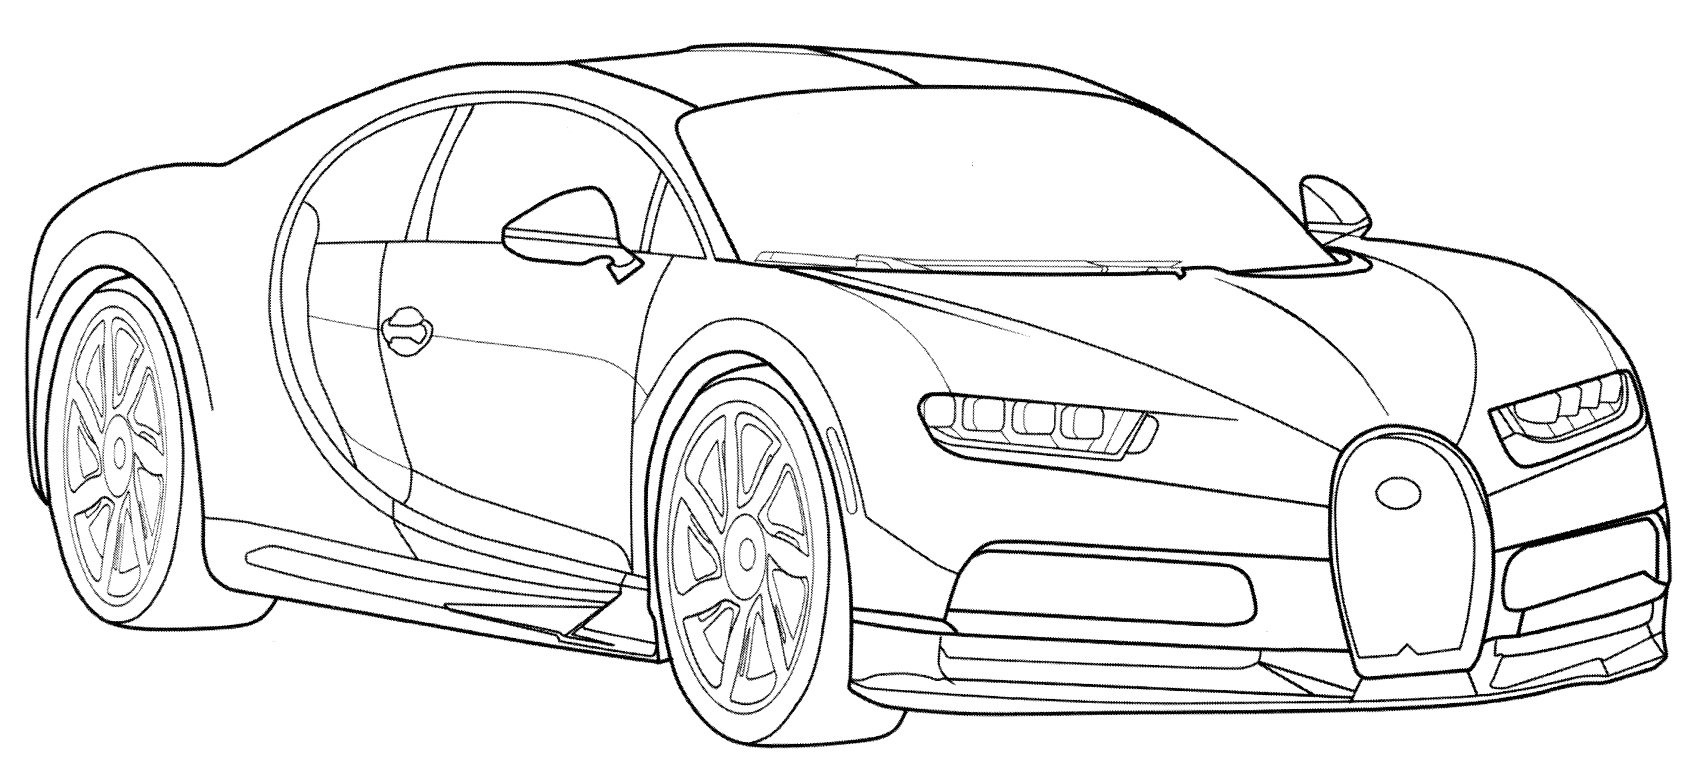 Bugatti chiron coloring pages